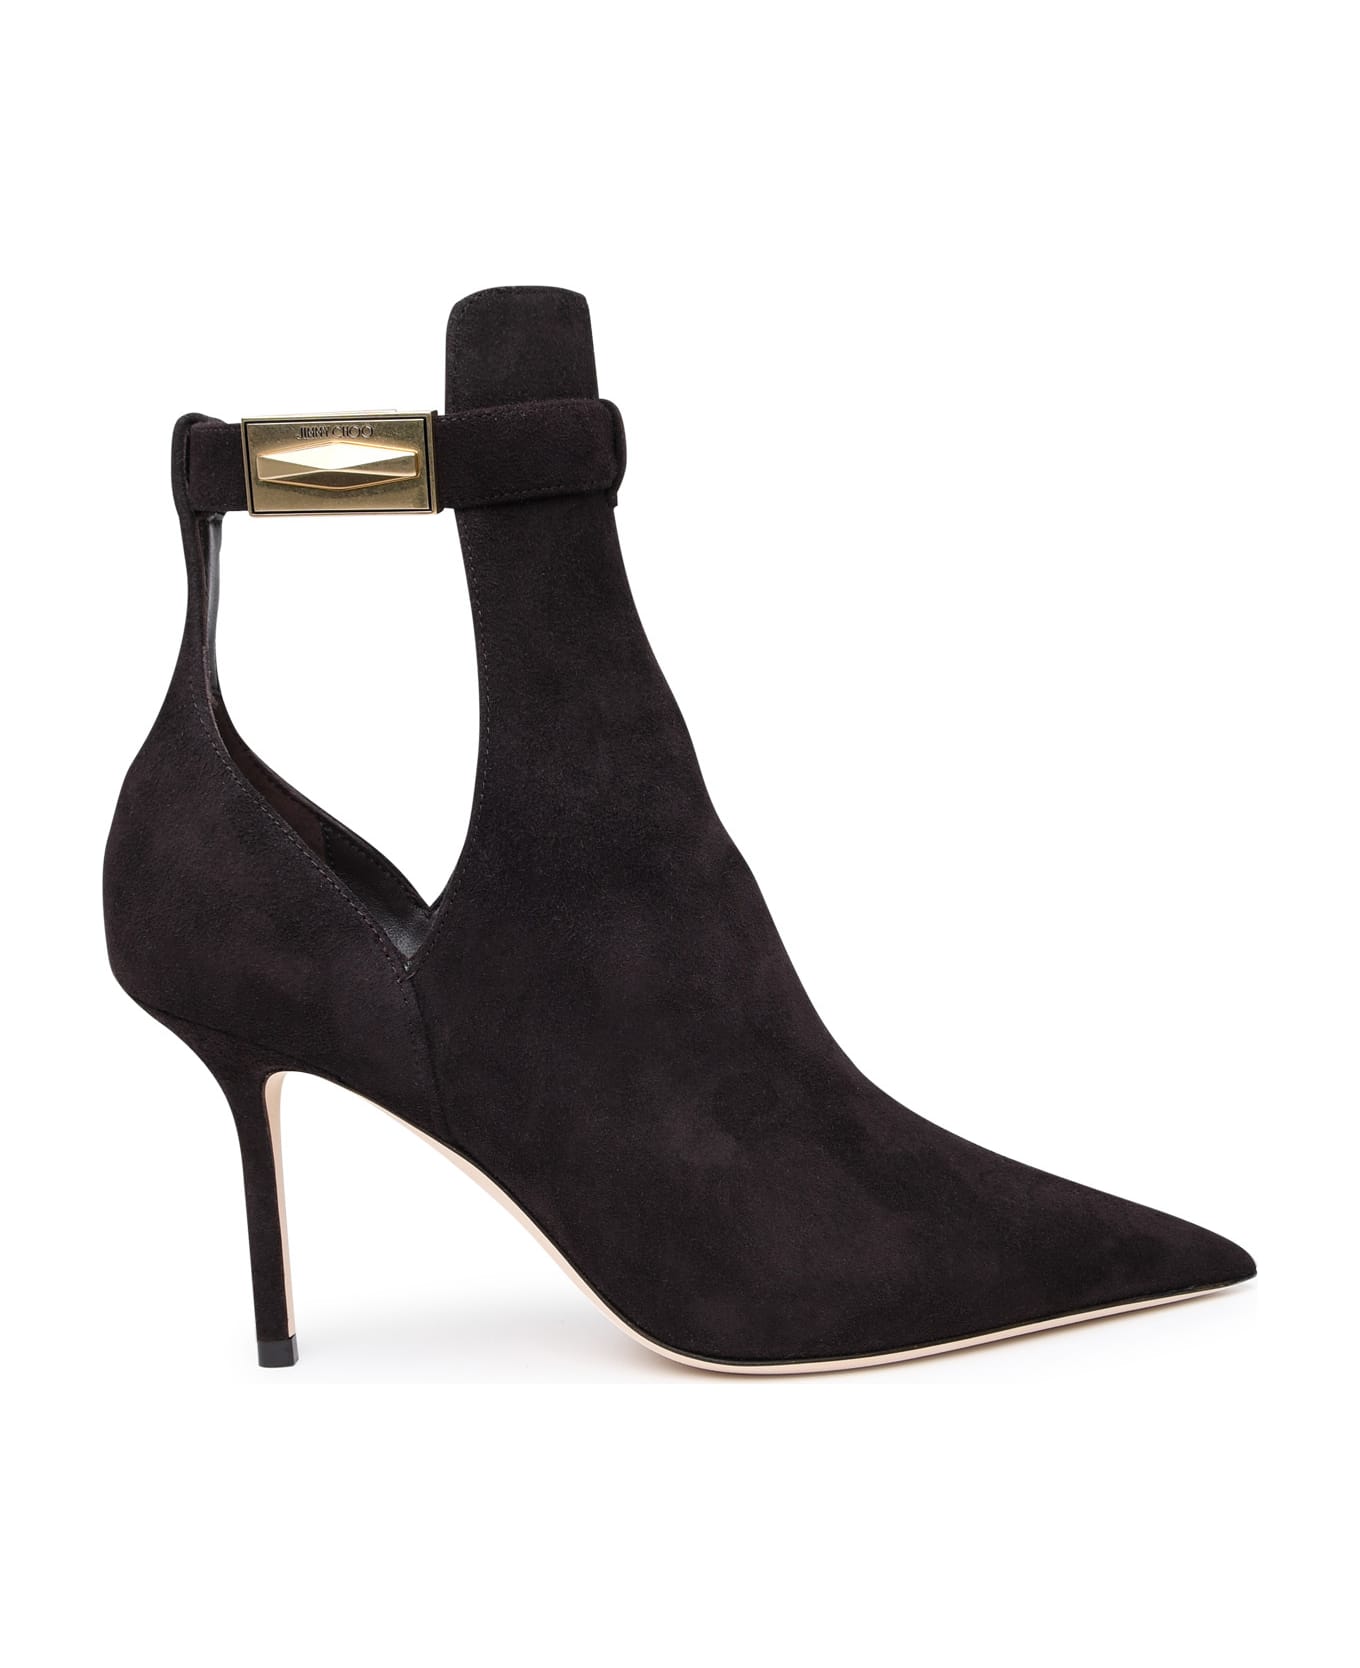 Jimmy Choo Nell Coffee Suede Ankle Boots - Brown